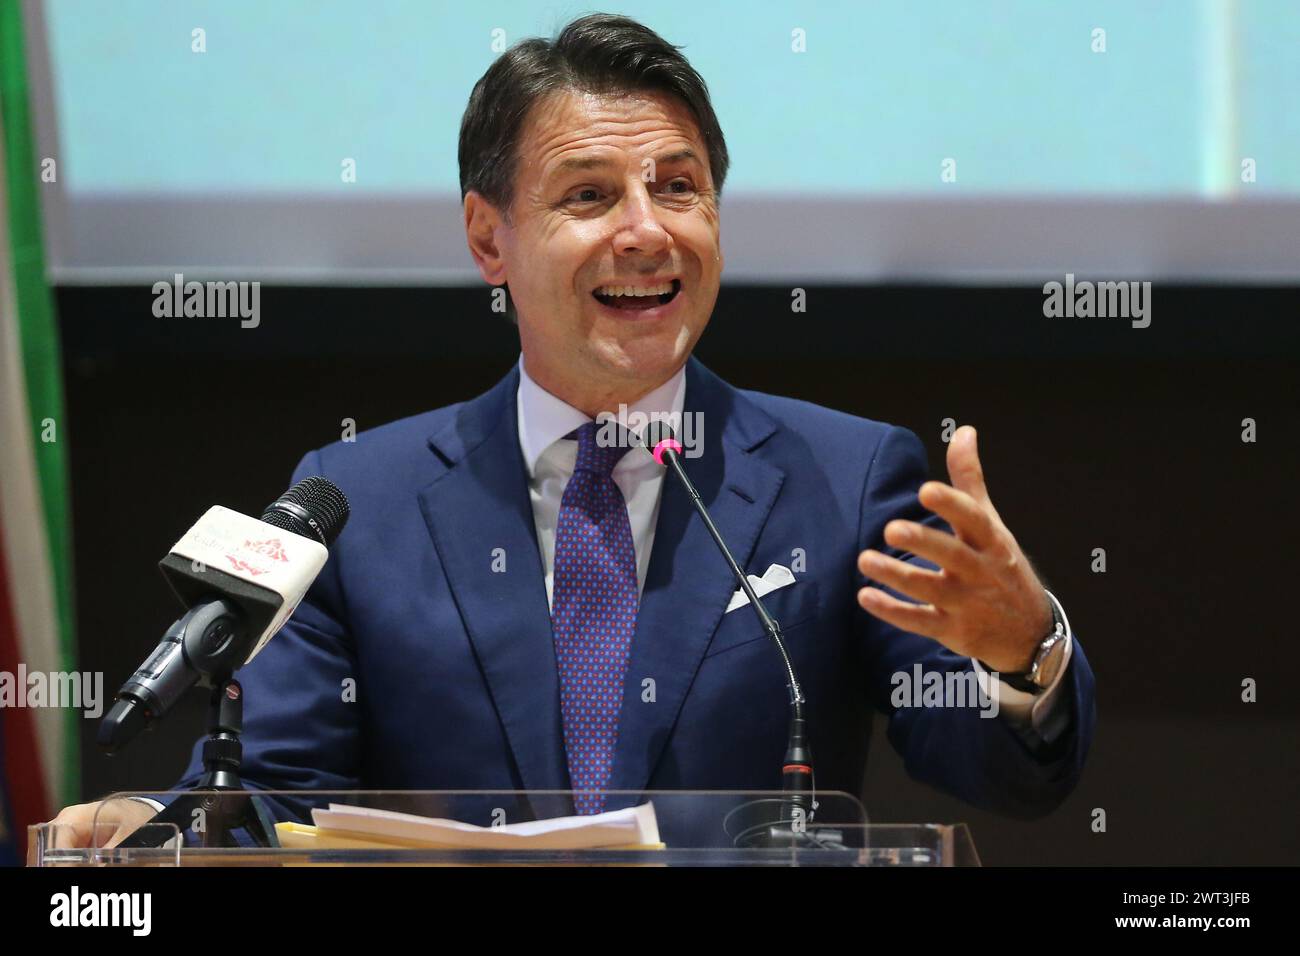 The President of the Council, Giuseppe Conte, at the Apple and Cisco Academy, at the University Federico II of Naples, speaks to newly graduated stude Stock Photo